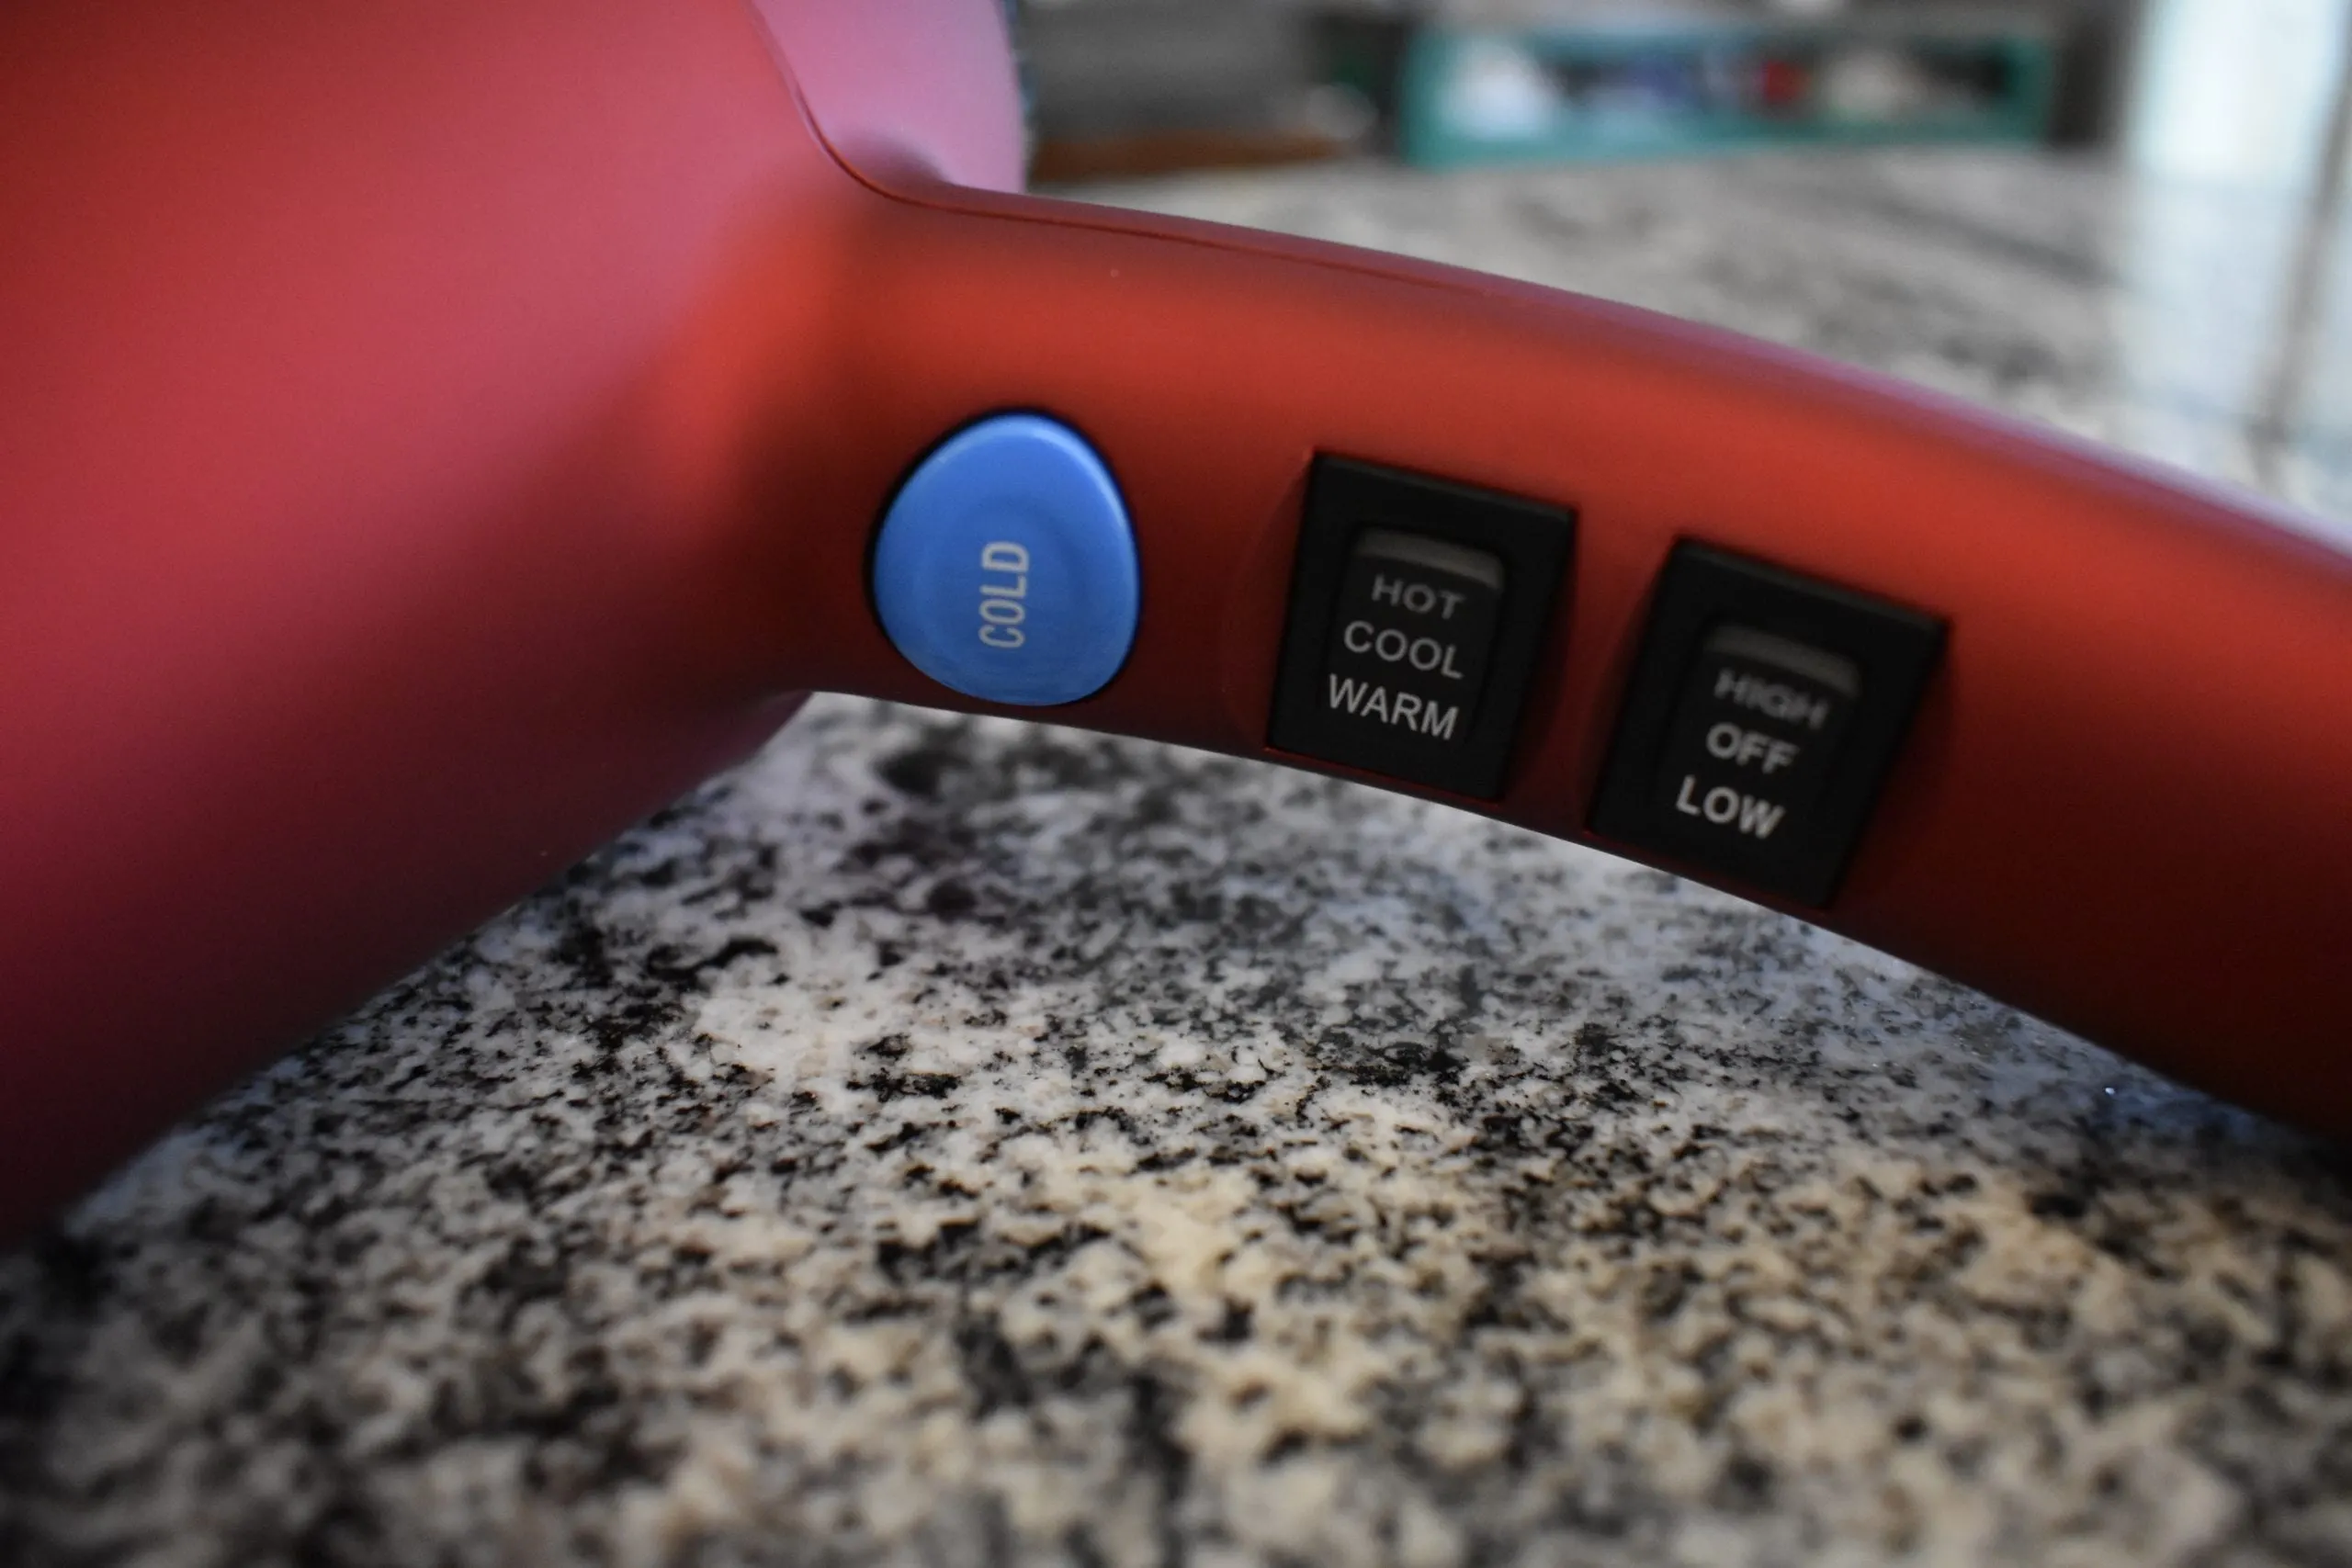 The buttons of the Babyliss Pro TT are small and hard to use